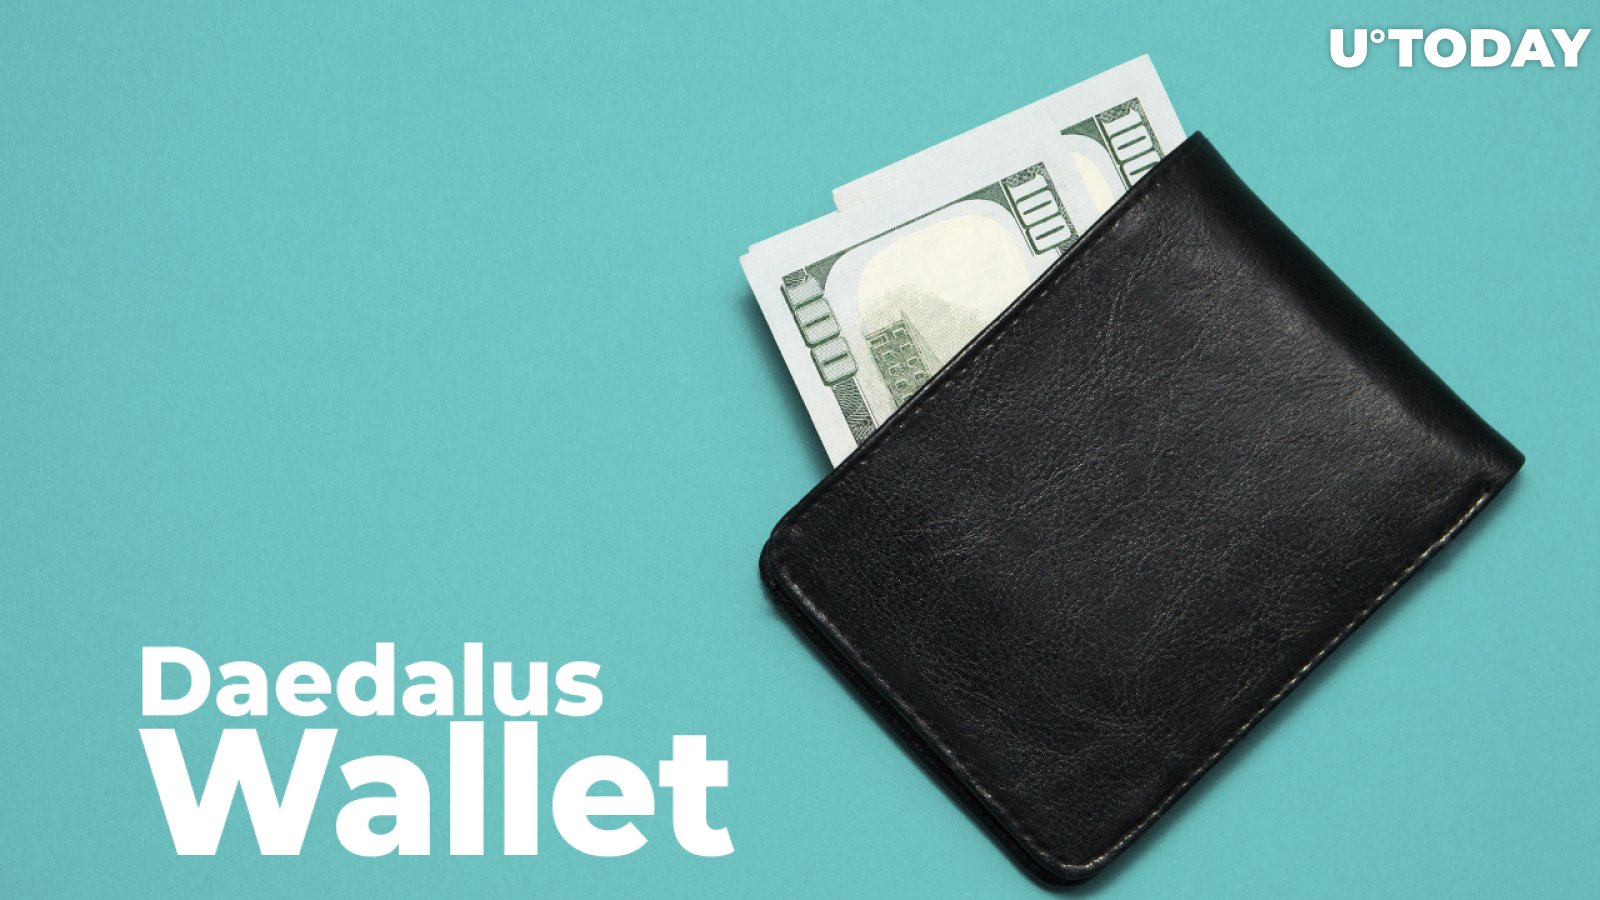 Cardano Releases New Daedalus Wallet Updates